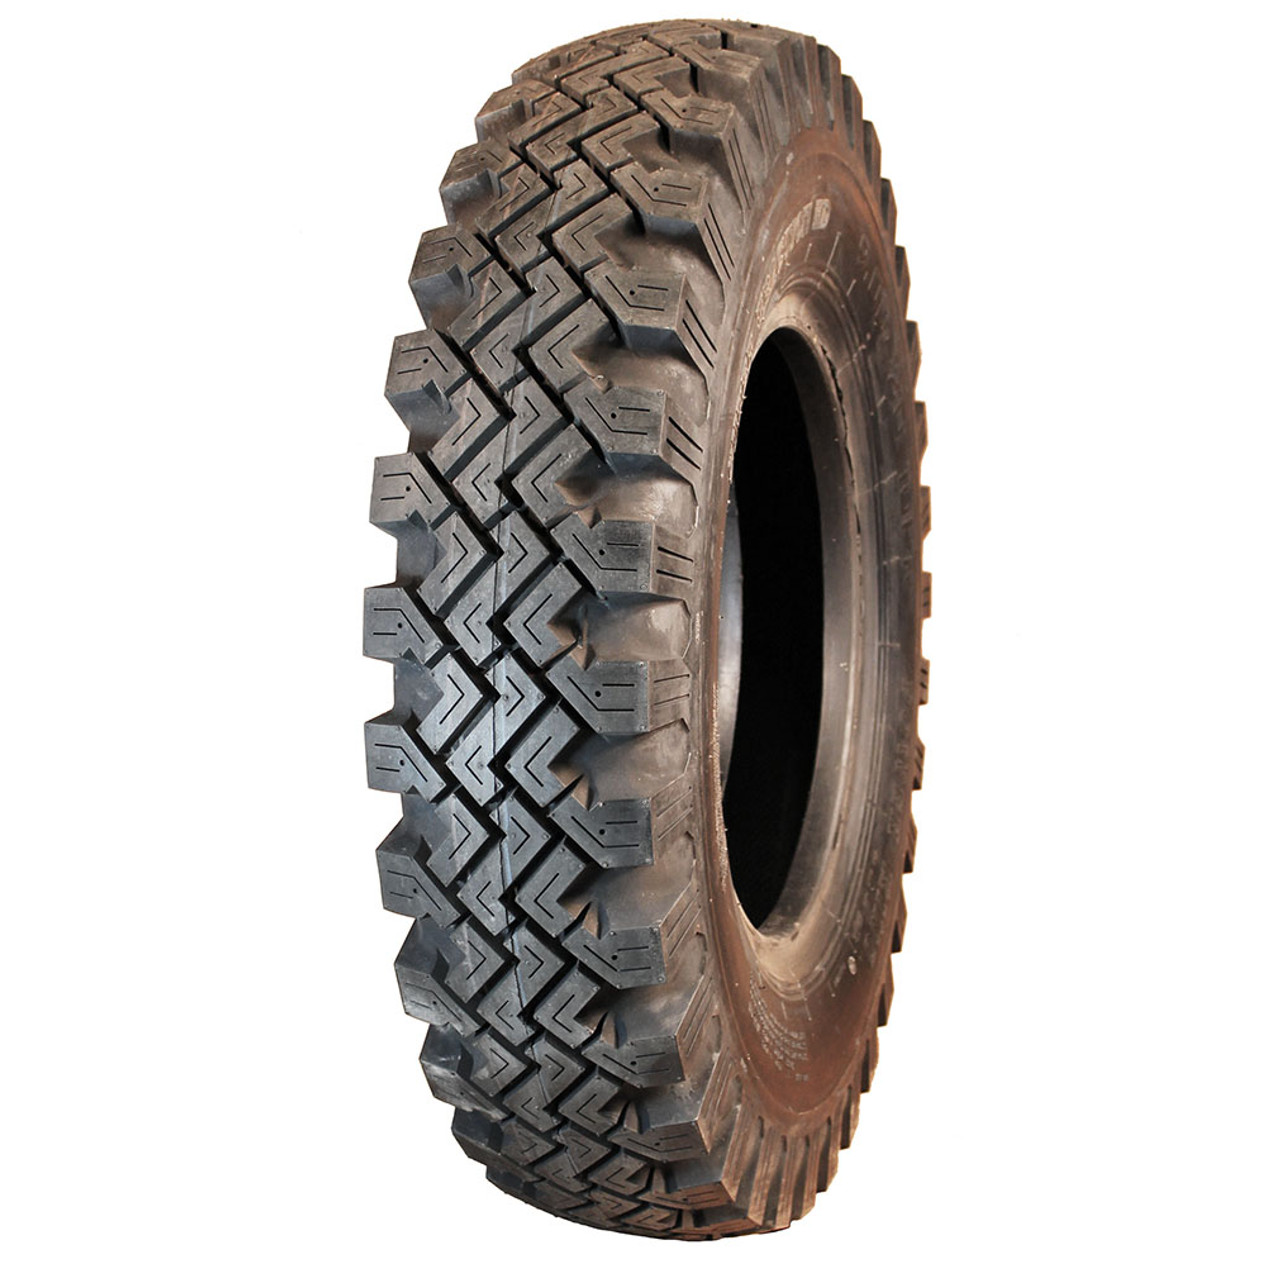 8.25-20 Power King Super Traction Truck Tire 10 Ply 10 Ply Tire On 1 2 Ton Truck